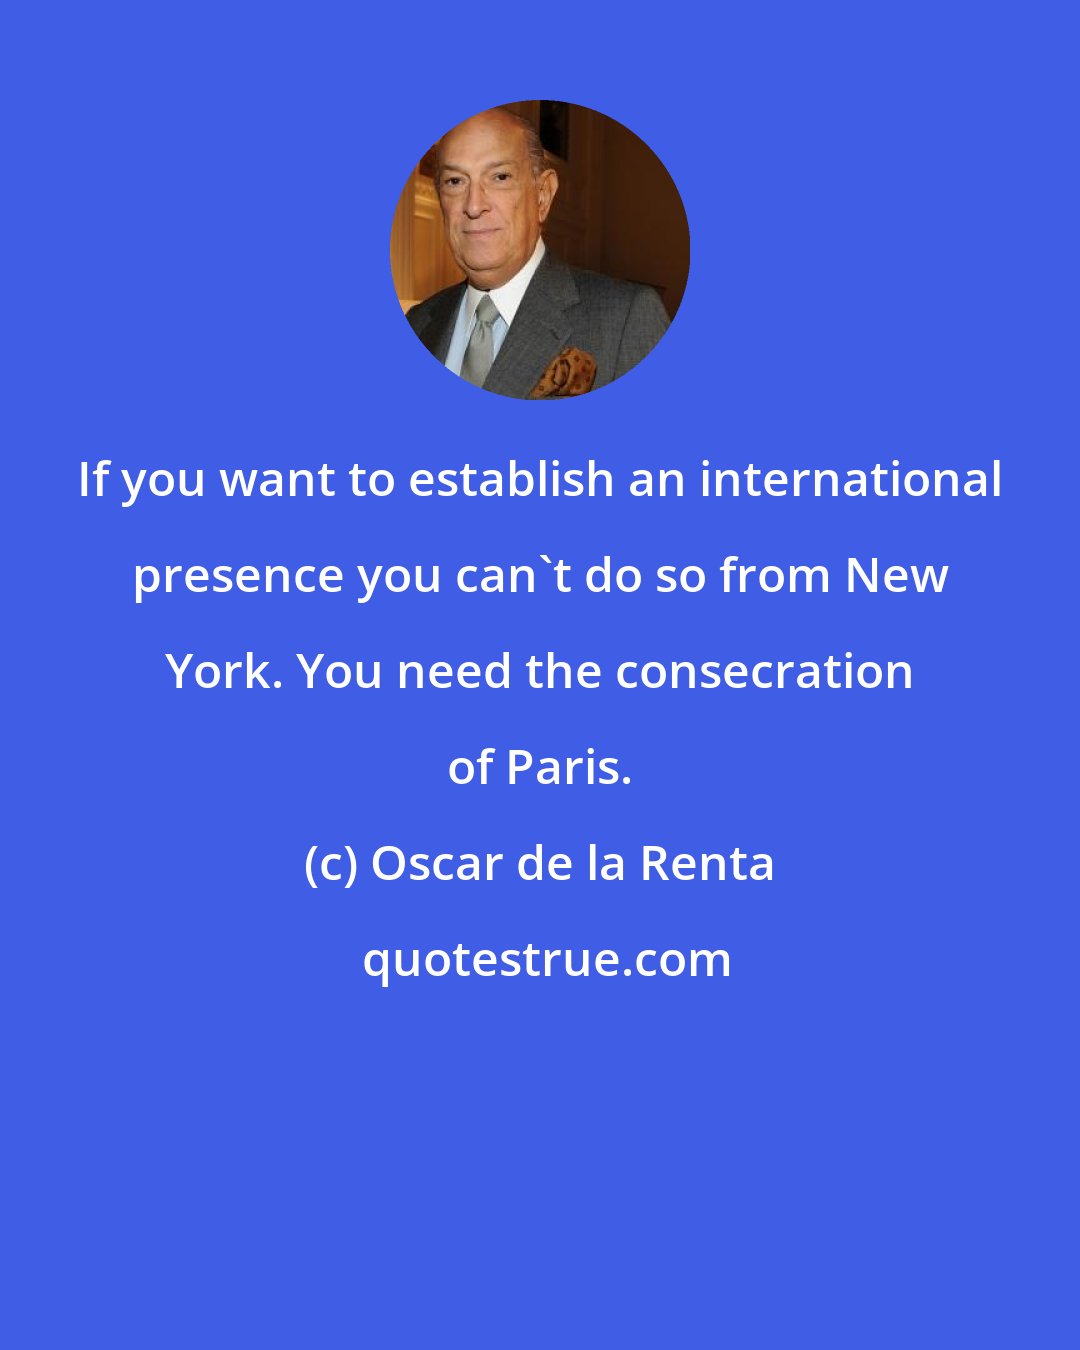 Oscar de la Renta: If you want to establish an international presence you can't do so from New York. You need the consecration of Paris.